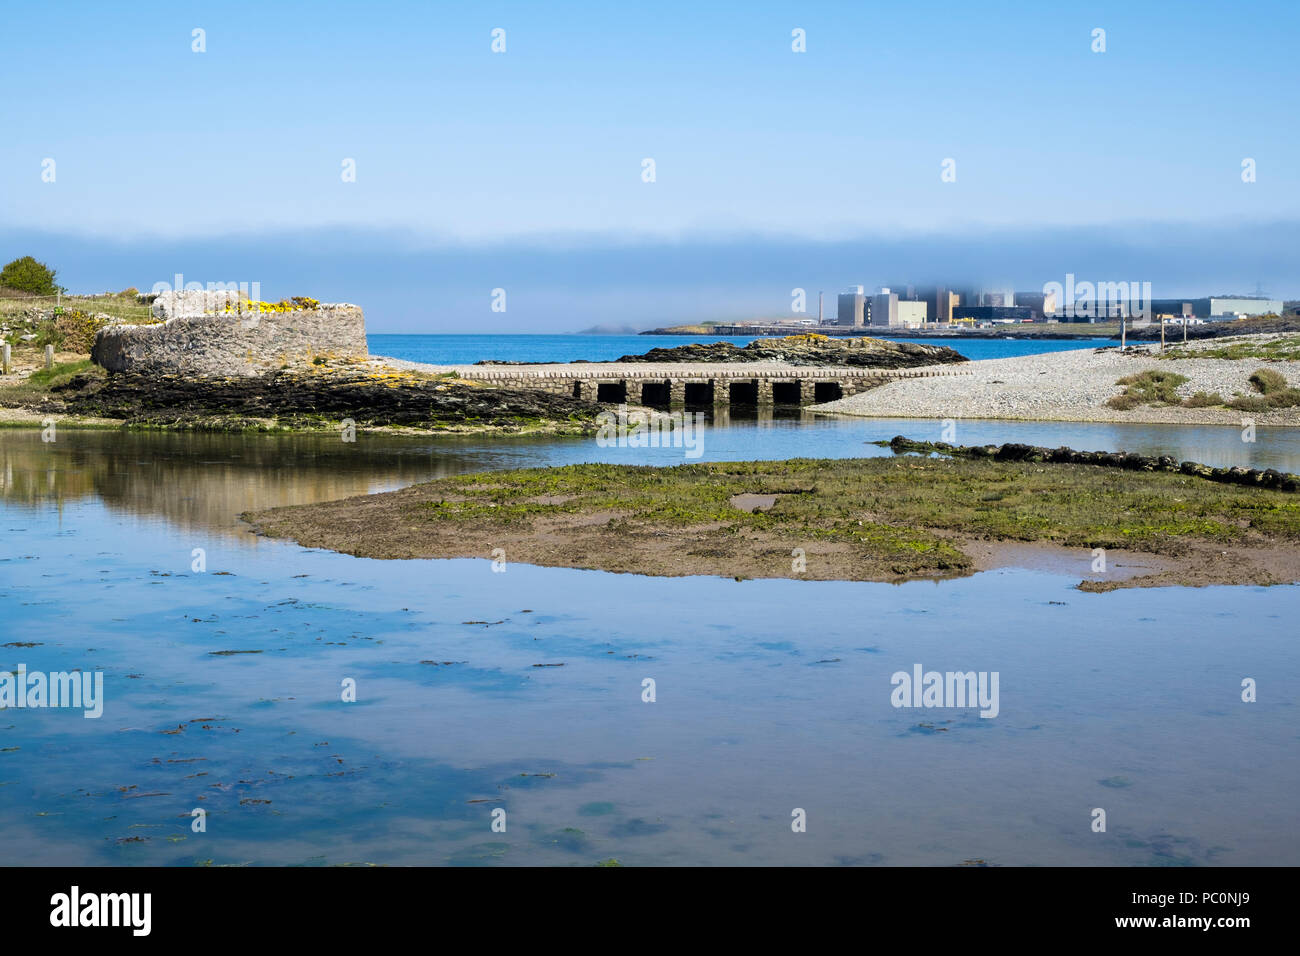 View across Cemlyn Bay tidal pool to footbridge and old Wylfa Nuclear Power Station in sea mist. Cemaes, Isle of Anglesey, Wales, UK, Britain Stock Photo